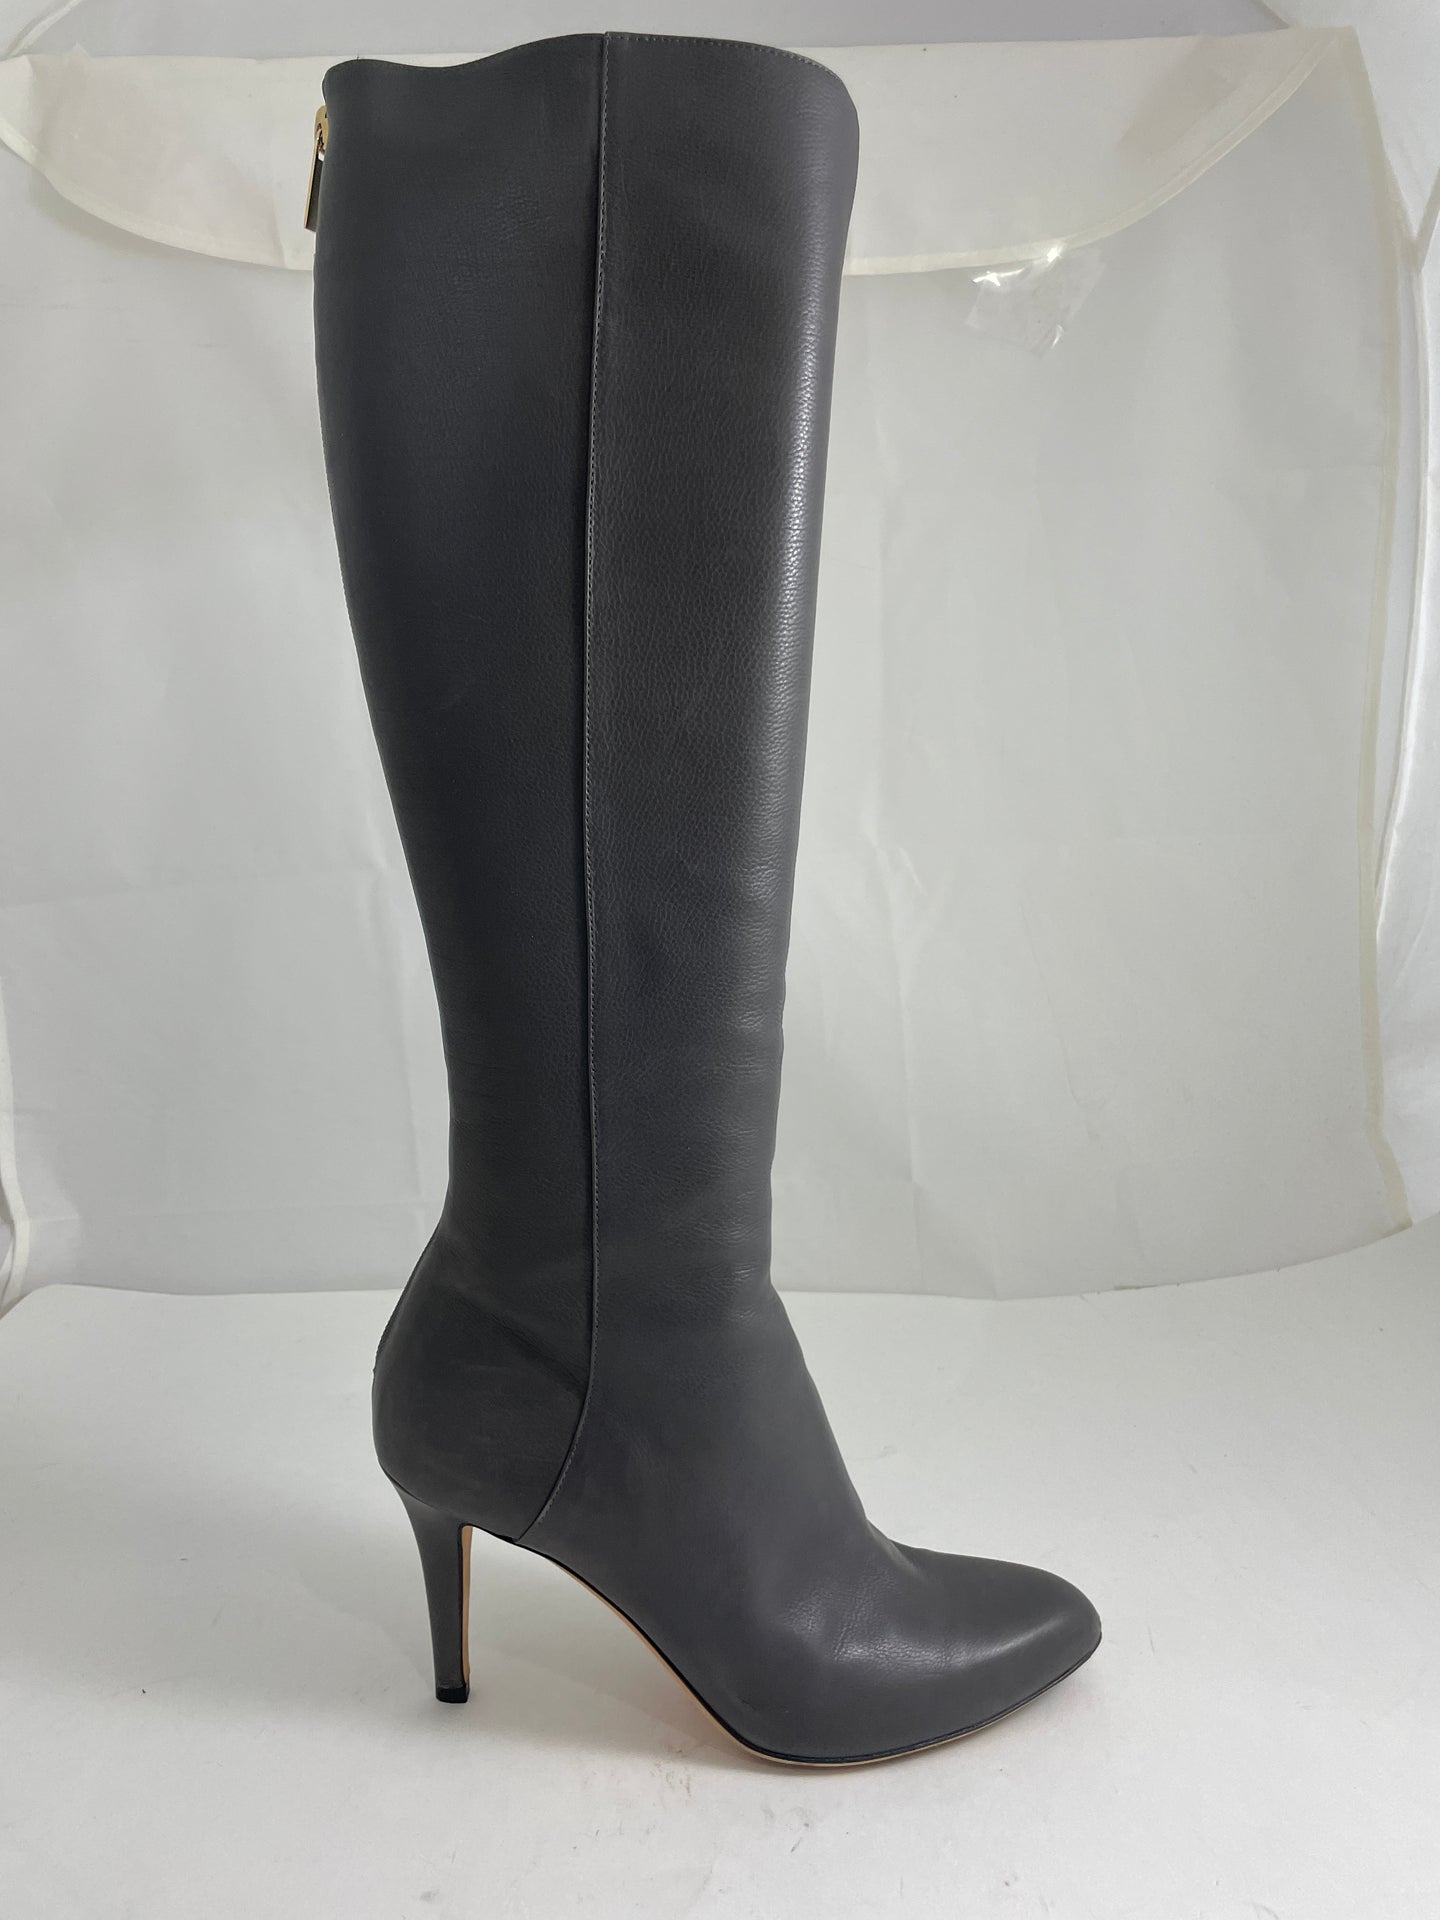 Jimmy Choo Gray Leather Knee High Boots